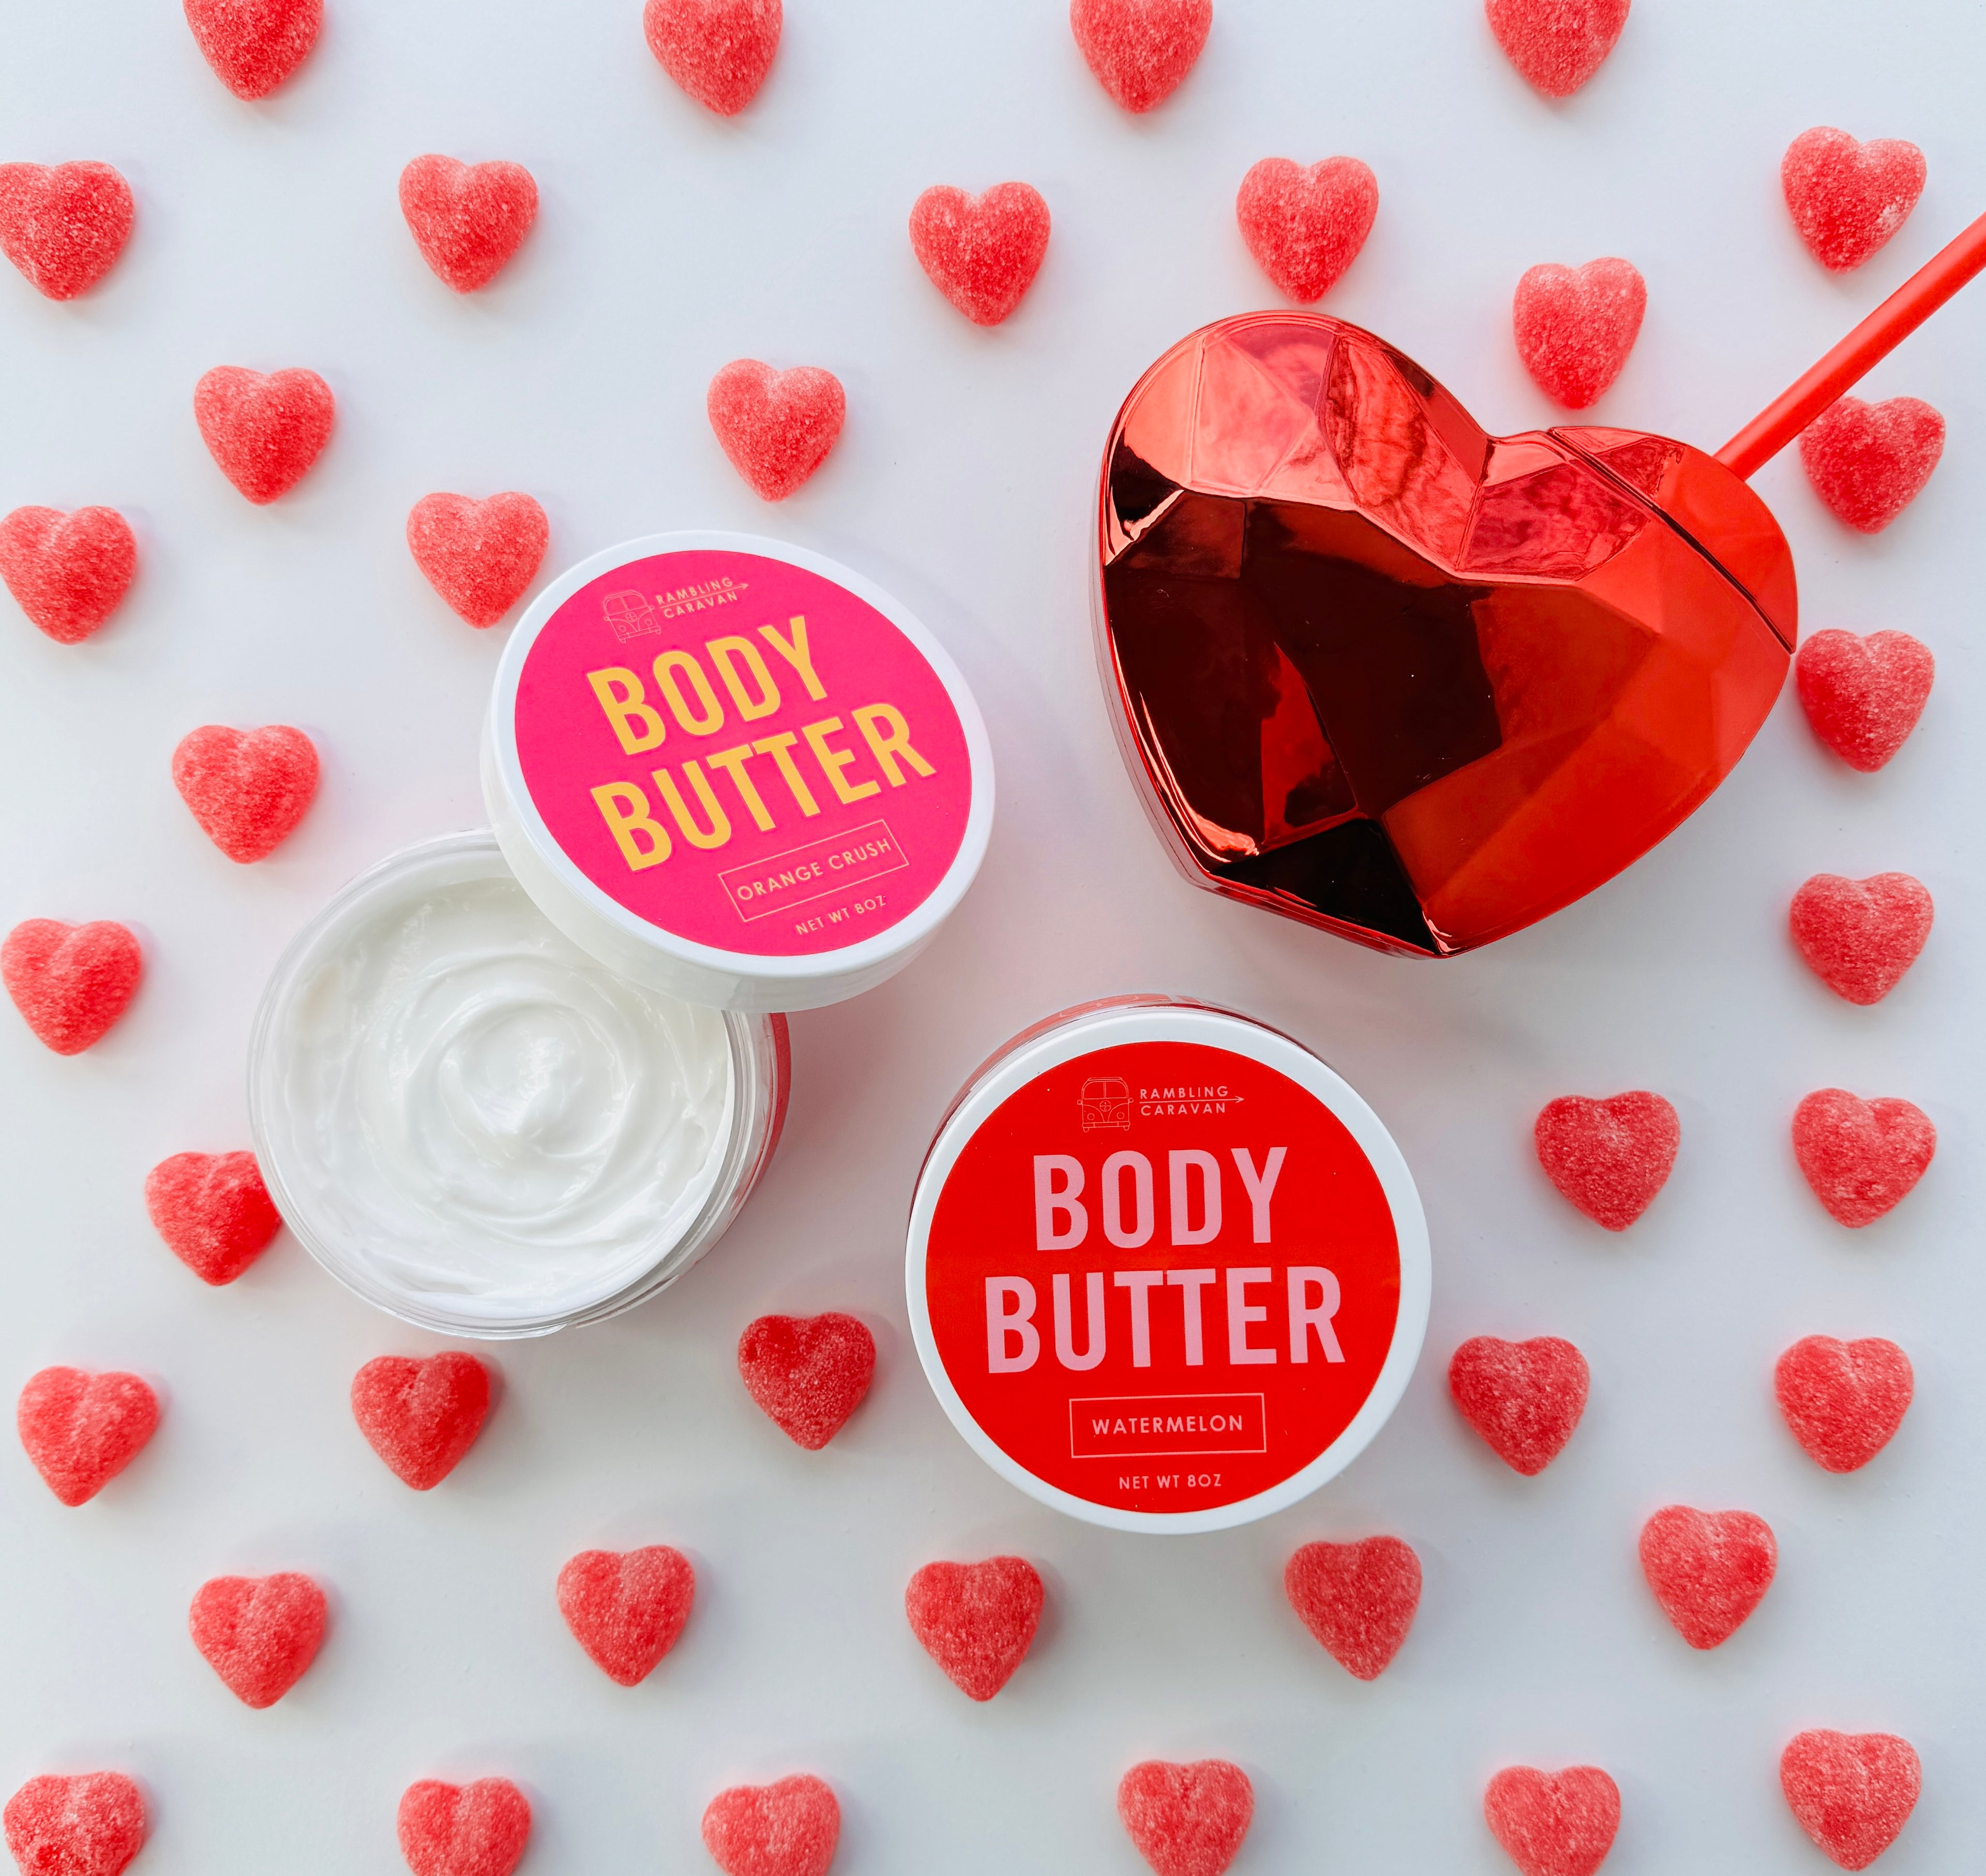 Watermelon and orange crush body butter surrounded by candy hearts.